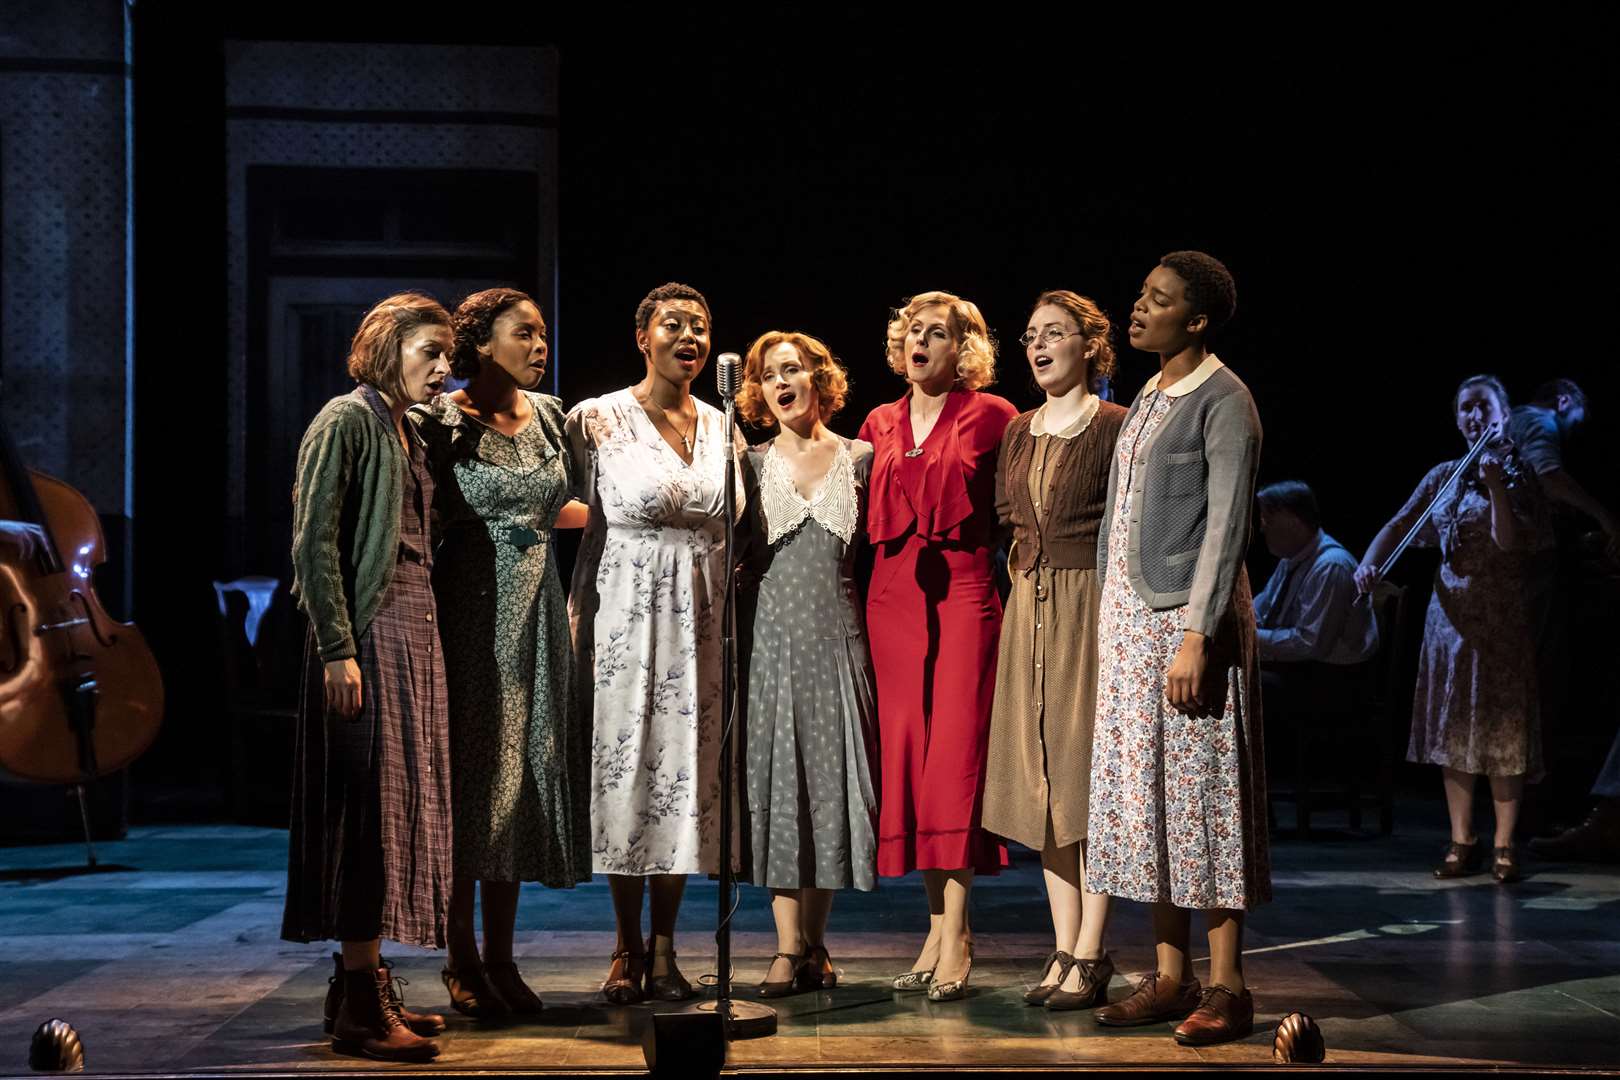 Girl From the North Country, based on the music of Bob Dylan, is coming to the Marlowe Theatre. Picture: Johan Persson